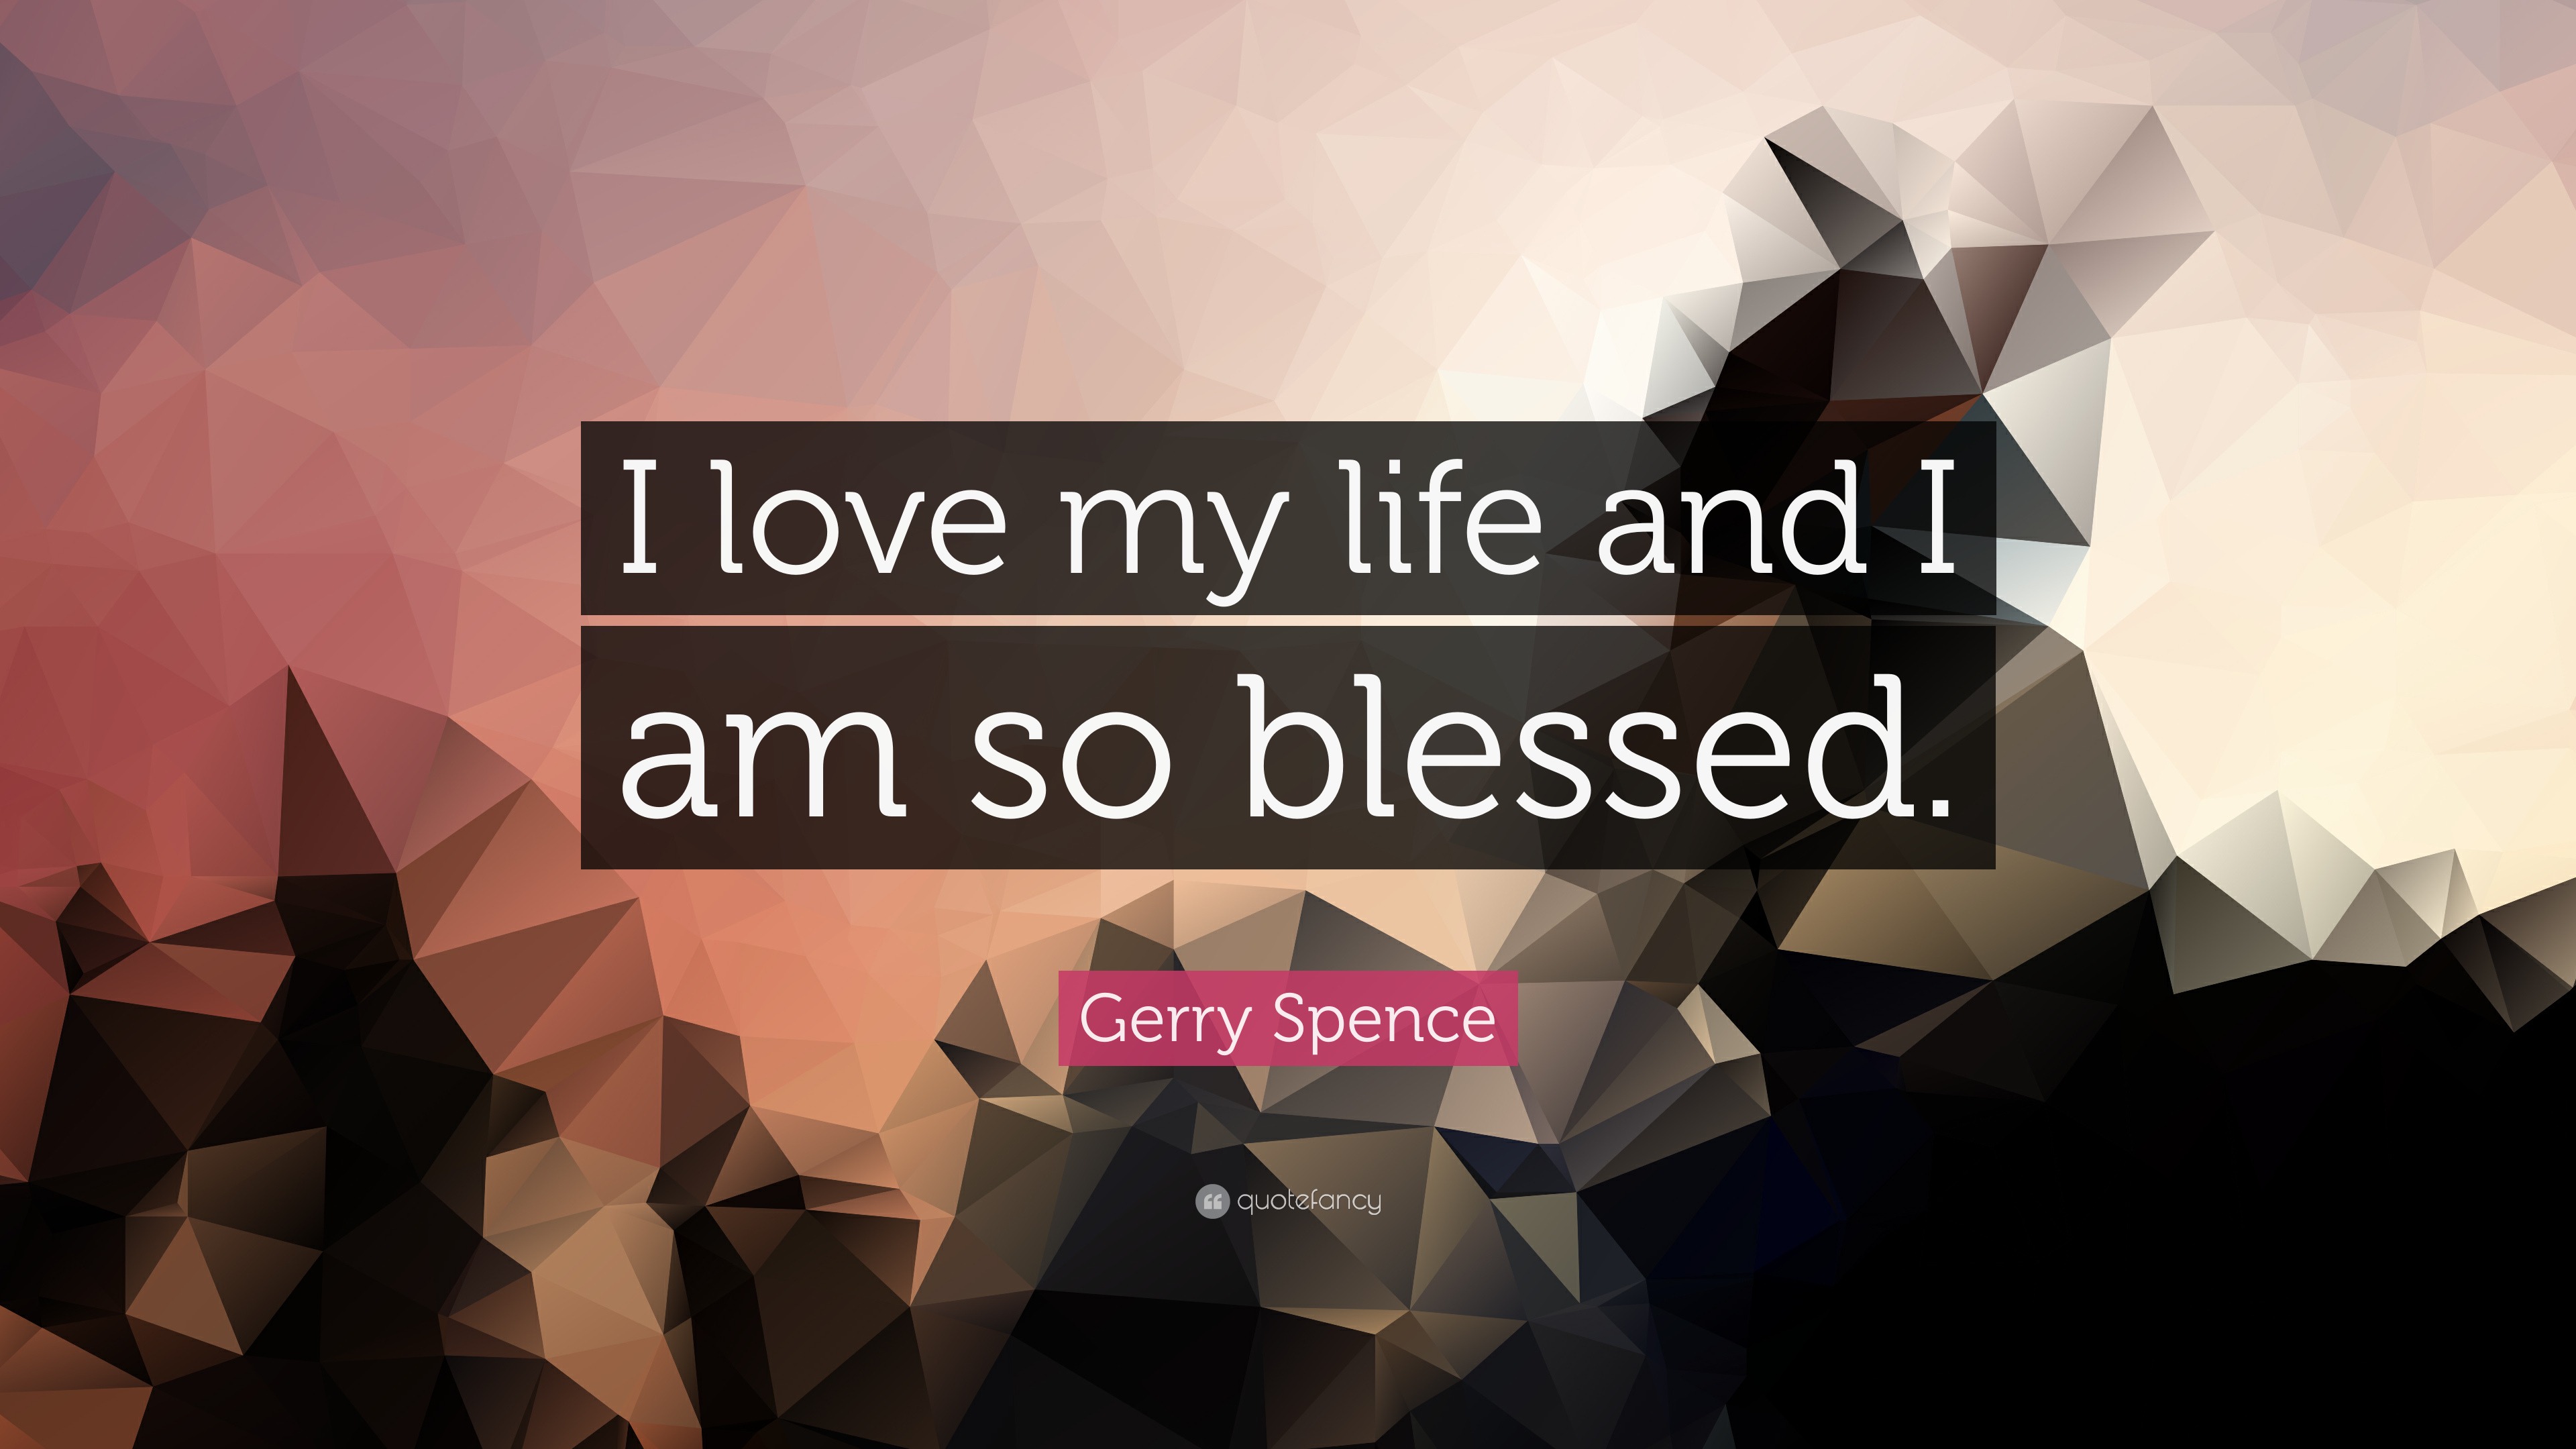 Gerry Spence Quote I Love My Life And I Am So Blessed